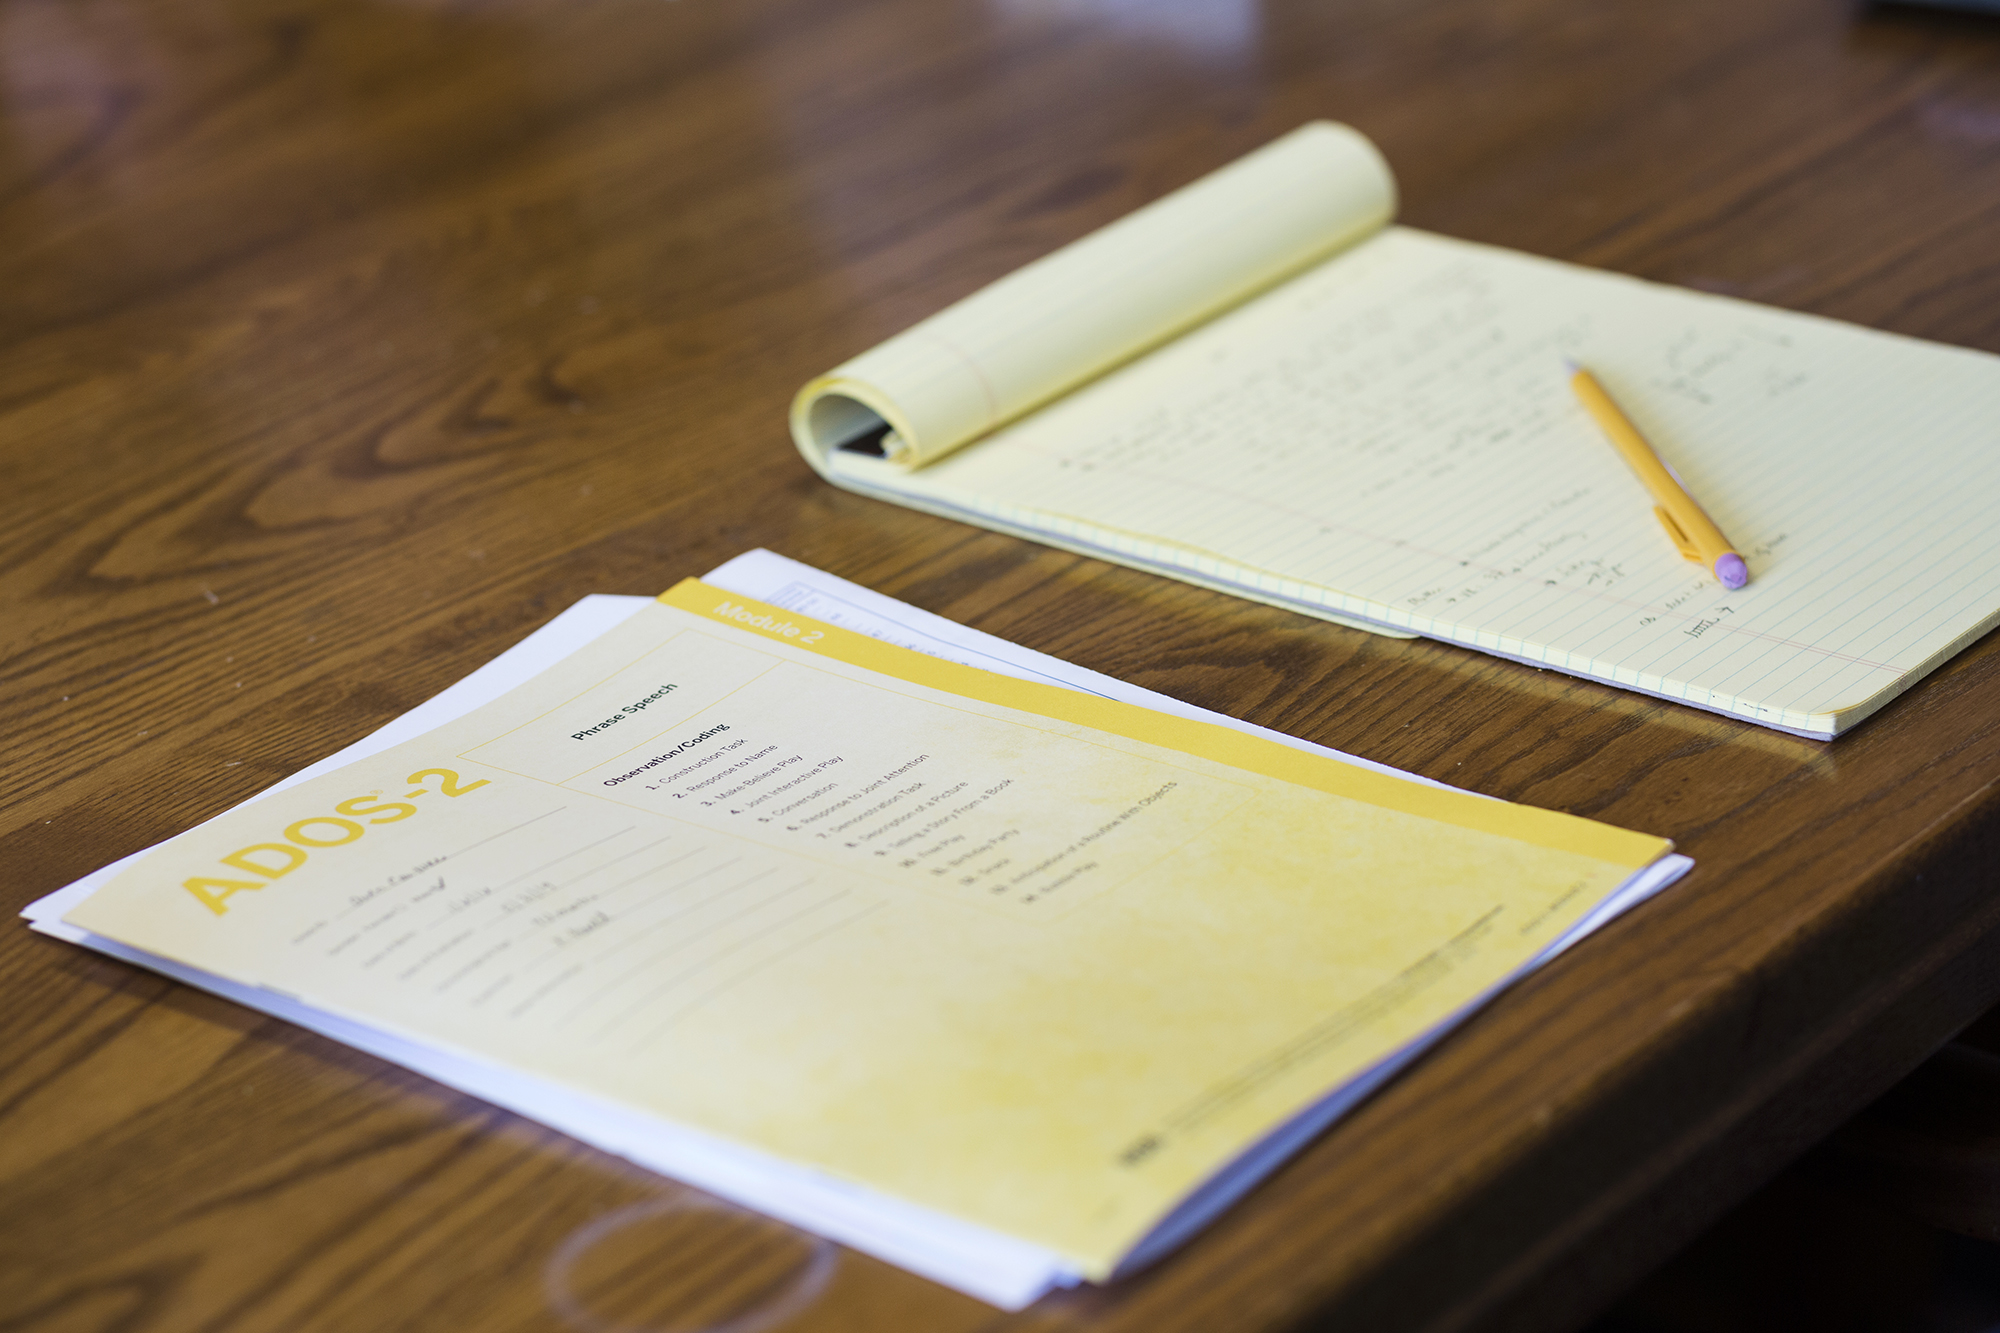 Photo: A workbook and a legal pad lie side by side on a wooden table. A yellow mechanical pencil lays on the legal pad.